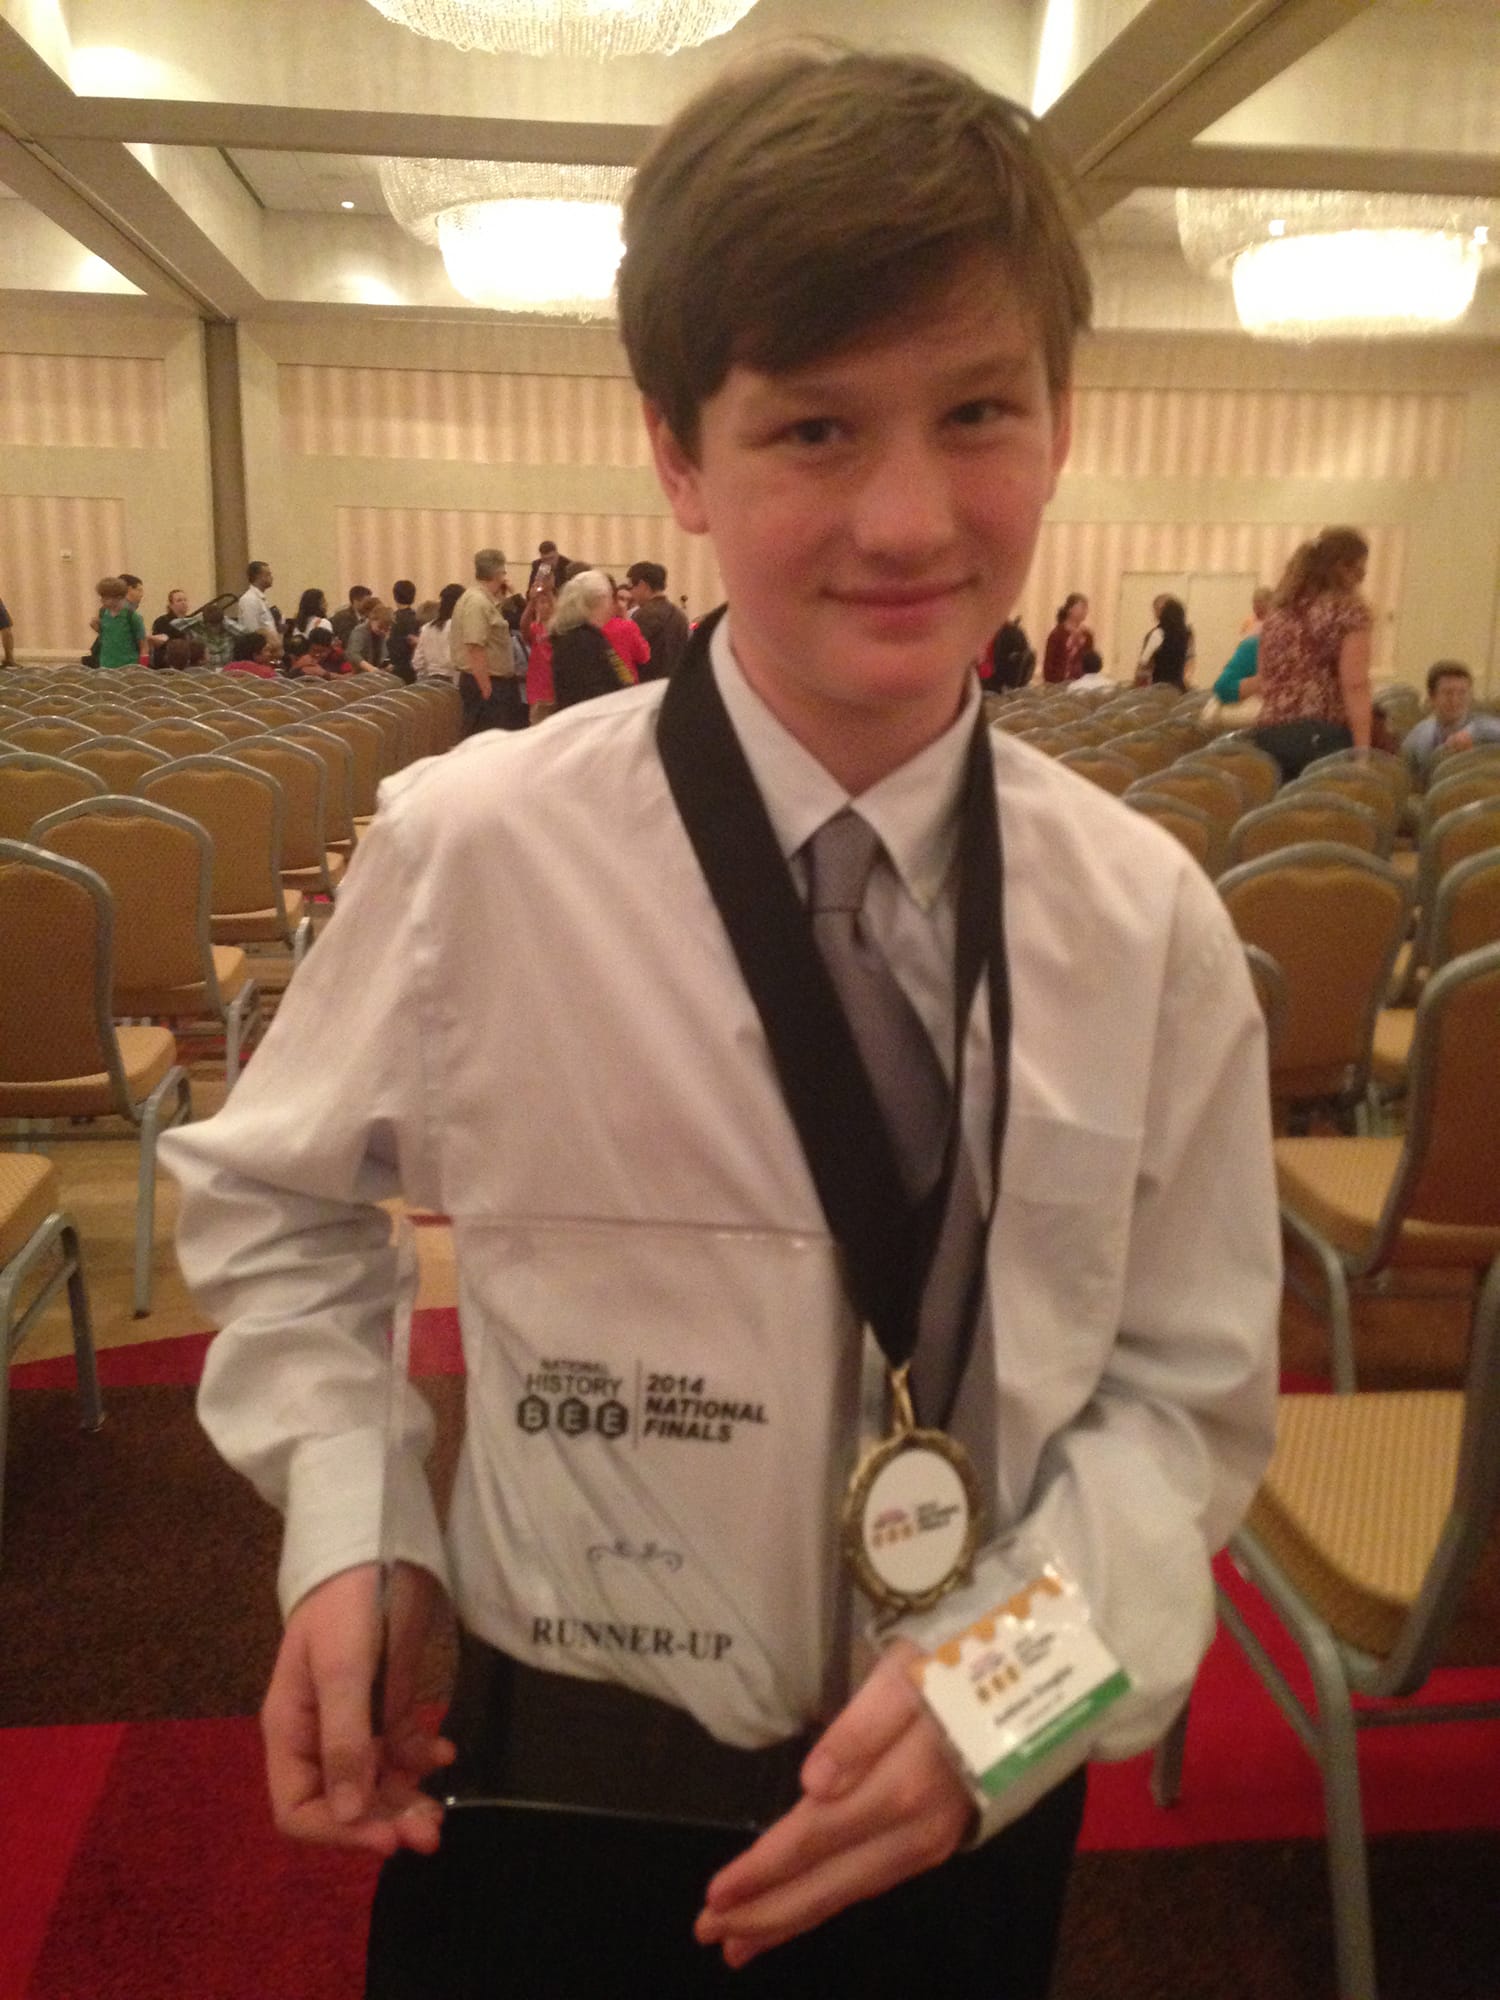 Andrew Douglas, 11, a fifth-grader at Eisenhower Elementary, advanced to the championship round at the National History Bee in Atlanta Saturday and took the National Elementary Runner Up title.